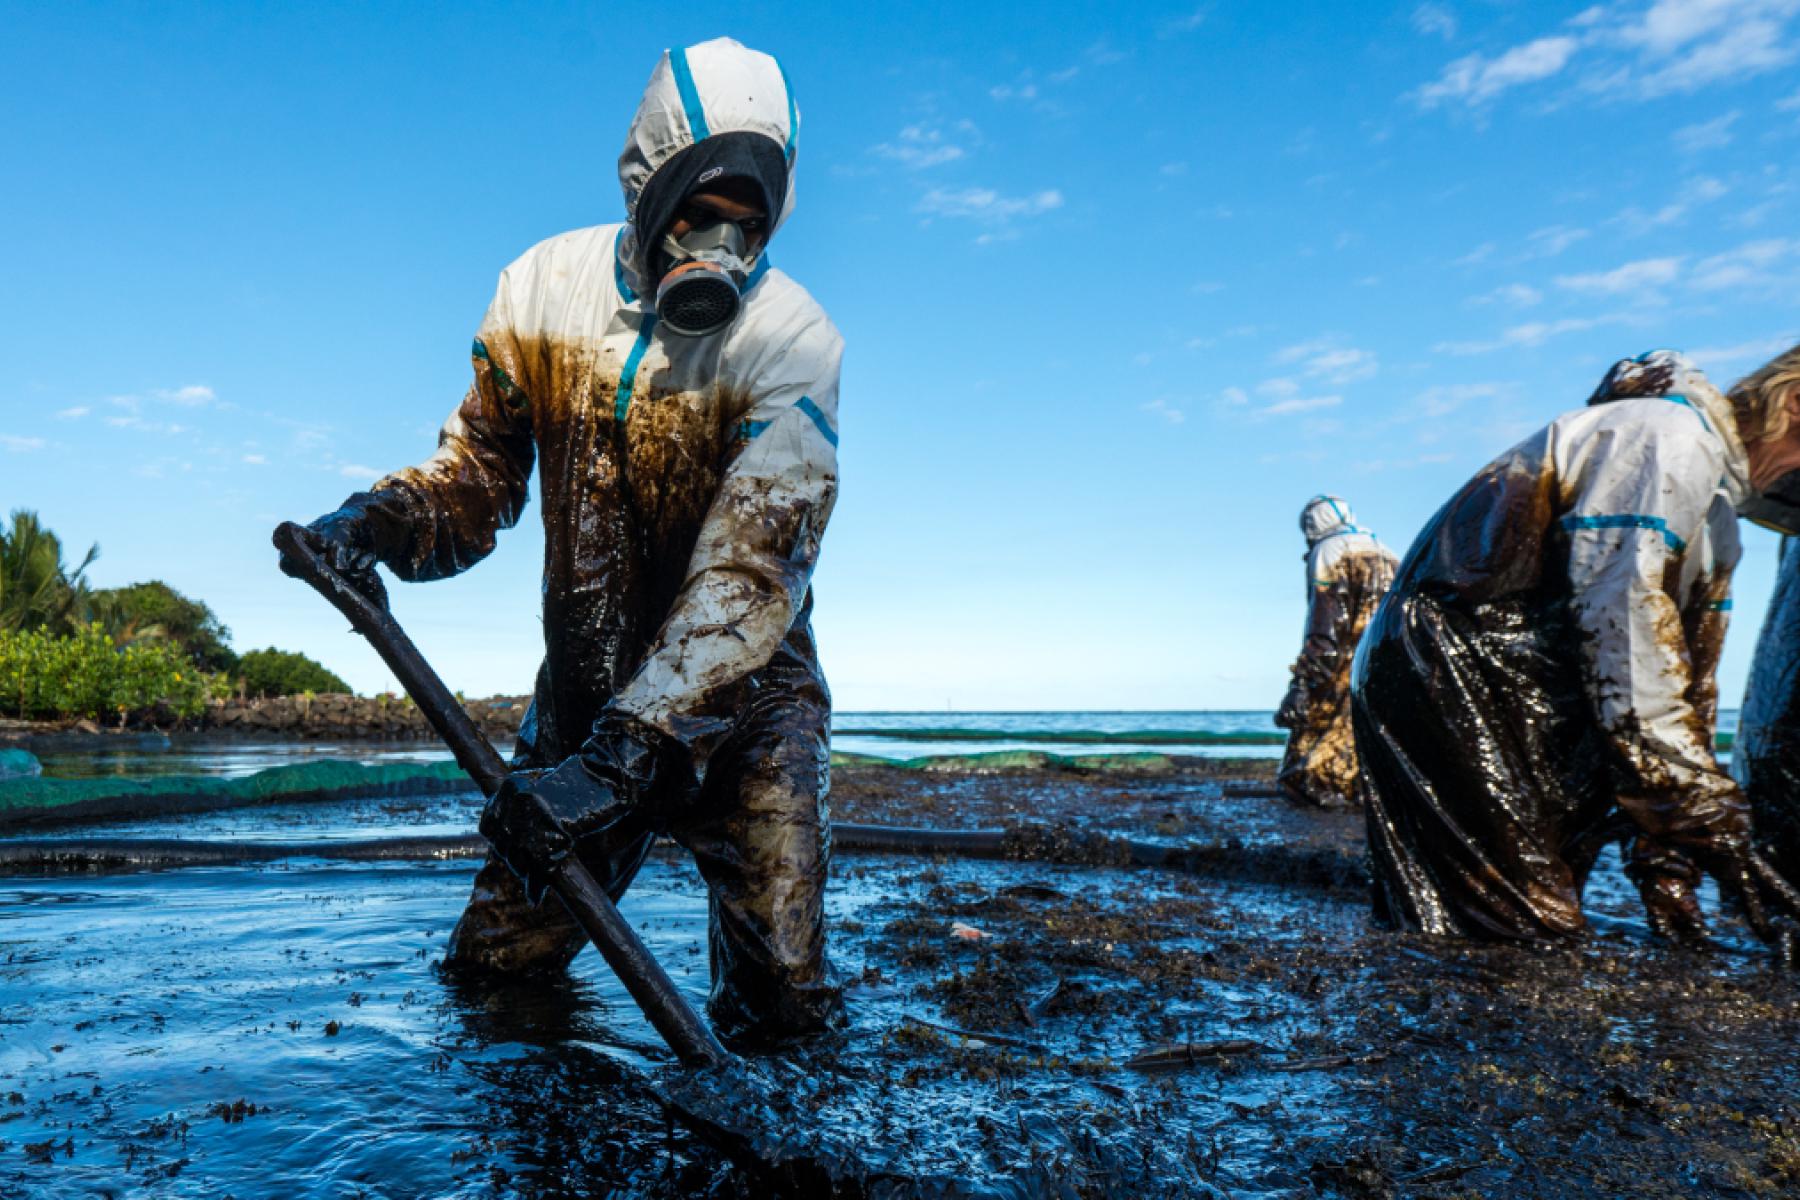 Volunteers clean oil spill, which is just one of numerous causes of marine pollution.